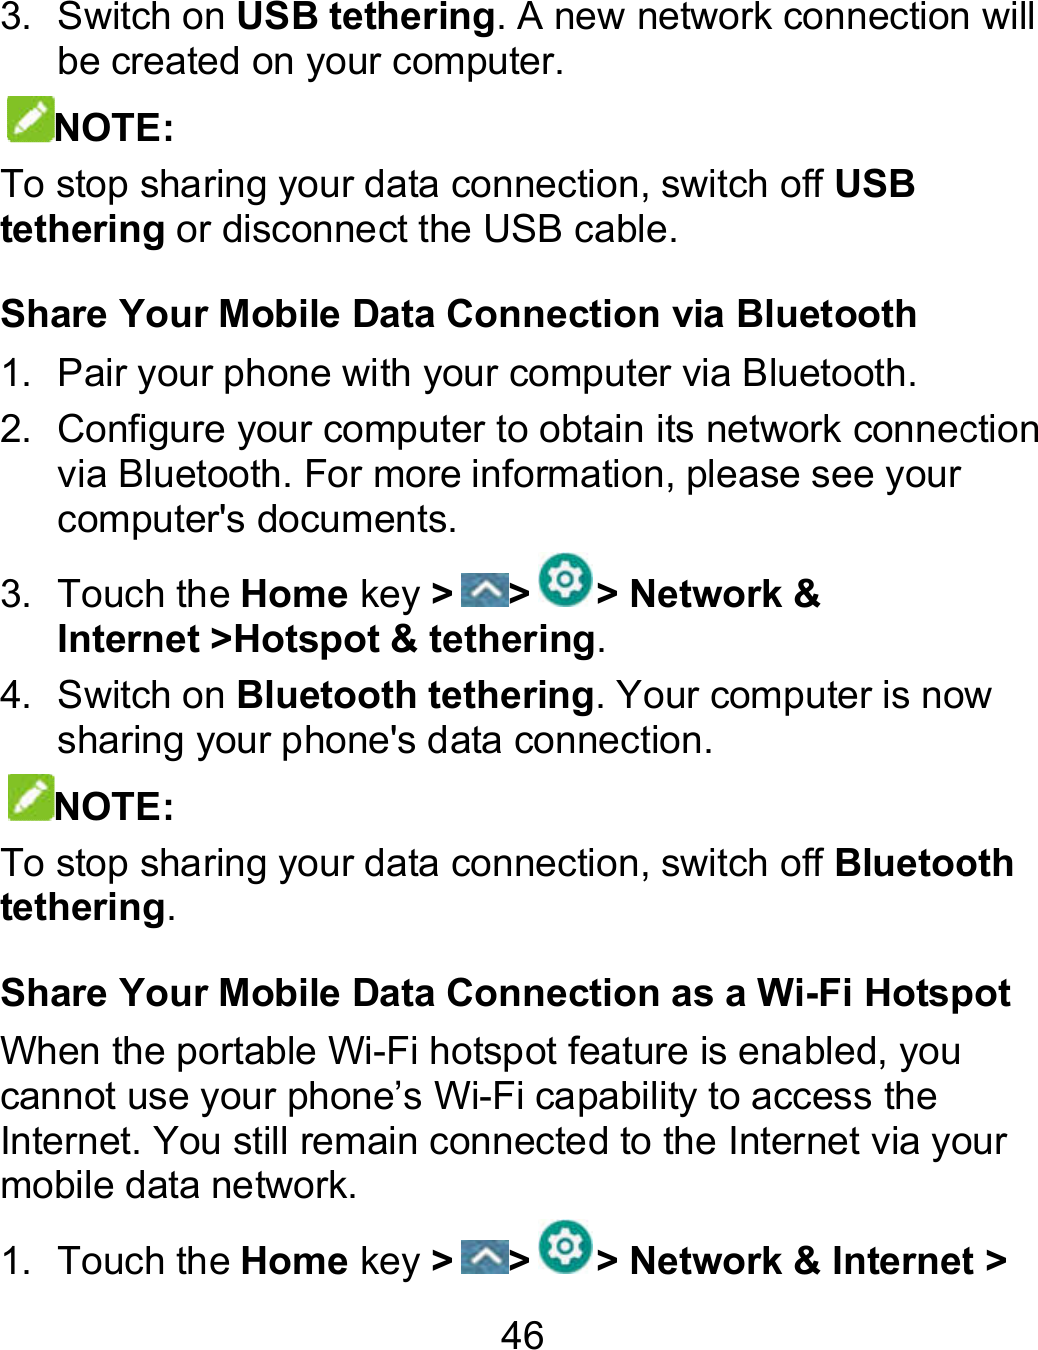 46 3.  Switch on USB tethering. A new network connection will be created on your computer. NOTE: To stop sharing your data connection, switch off USB tethering or disconnect the USB cable. Share Your Mobile Data Connection via Bluetooth 1.  Pair your phone with your computer via Bluetooth. 2. Configure your computer to obtain its network connection via Bluetooth. For more information, please see your computer&apos;s documents. 3.  Touch the Home key &gt; &gt; &gt; Network &amp; Internet &gt;Hotspot &amp; tethering. 4.  Switch on Bluetooth tethering. Your computer is now sharing your phone&apos;s data connection. NOTE: To stop sharing your data connection, switch off Bluetooth tethering. Share Your Mobile Data Connection as a Wi-Fi HotspotWhen the portable Wi-Fi hotspot feature is enabled, you cannot use your phone’s Wi-Fi capability to access the Internet. You still remain connected to the Internet via your mobile data network. 1.  Touch the Home key &gt; &gt; &gt; Network &amp; Internet . A new network connection will Configure your computer to obtain its network connection via Bluetooth. For more information, please see your is now Bluetooth Fi Hotspot Fi hotspot feature is enabled, you Internet. You still remain connected to the Internet via your Network &amp; Internet &gt; 